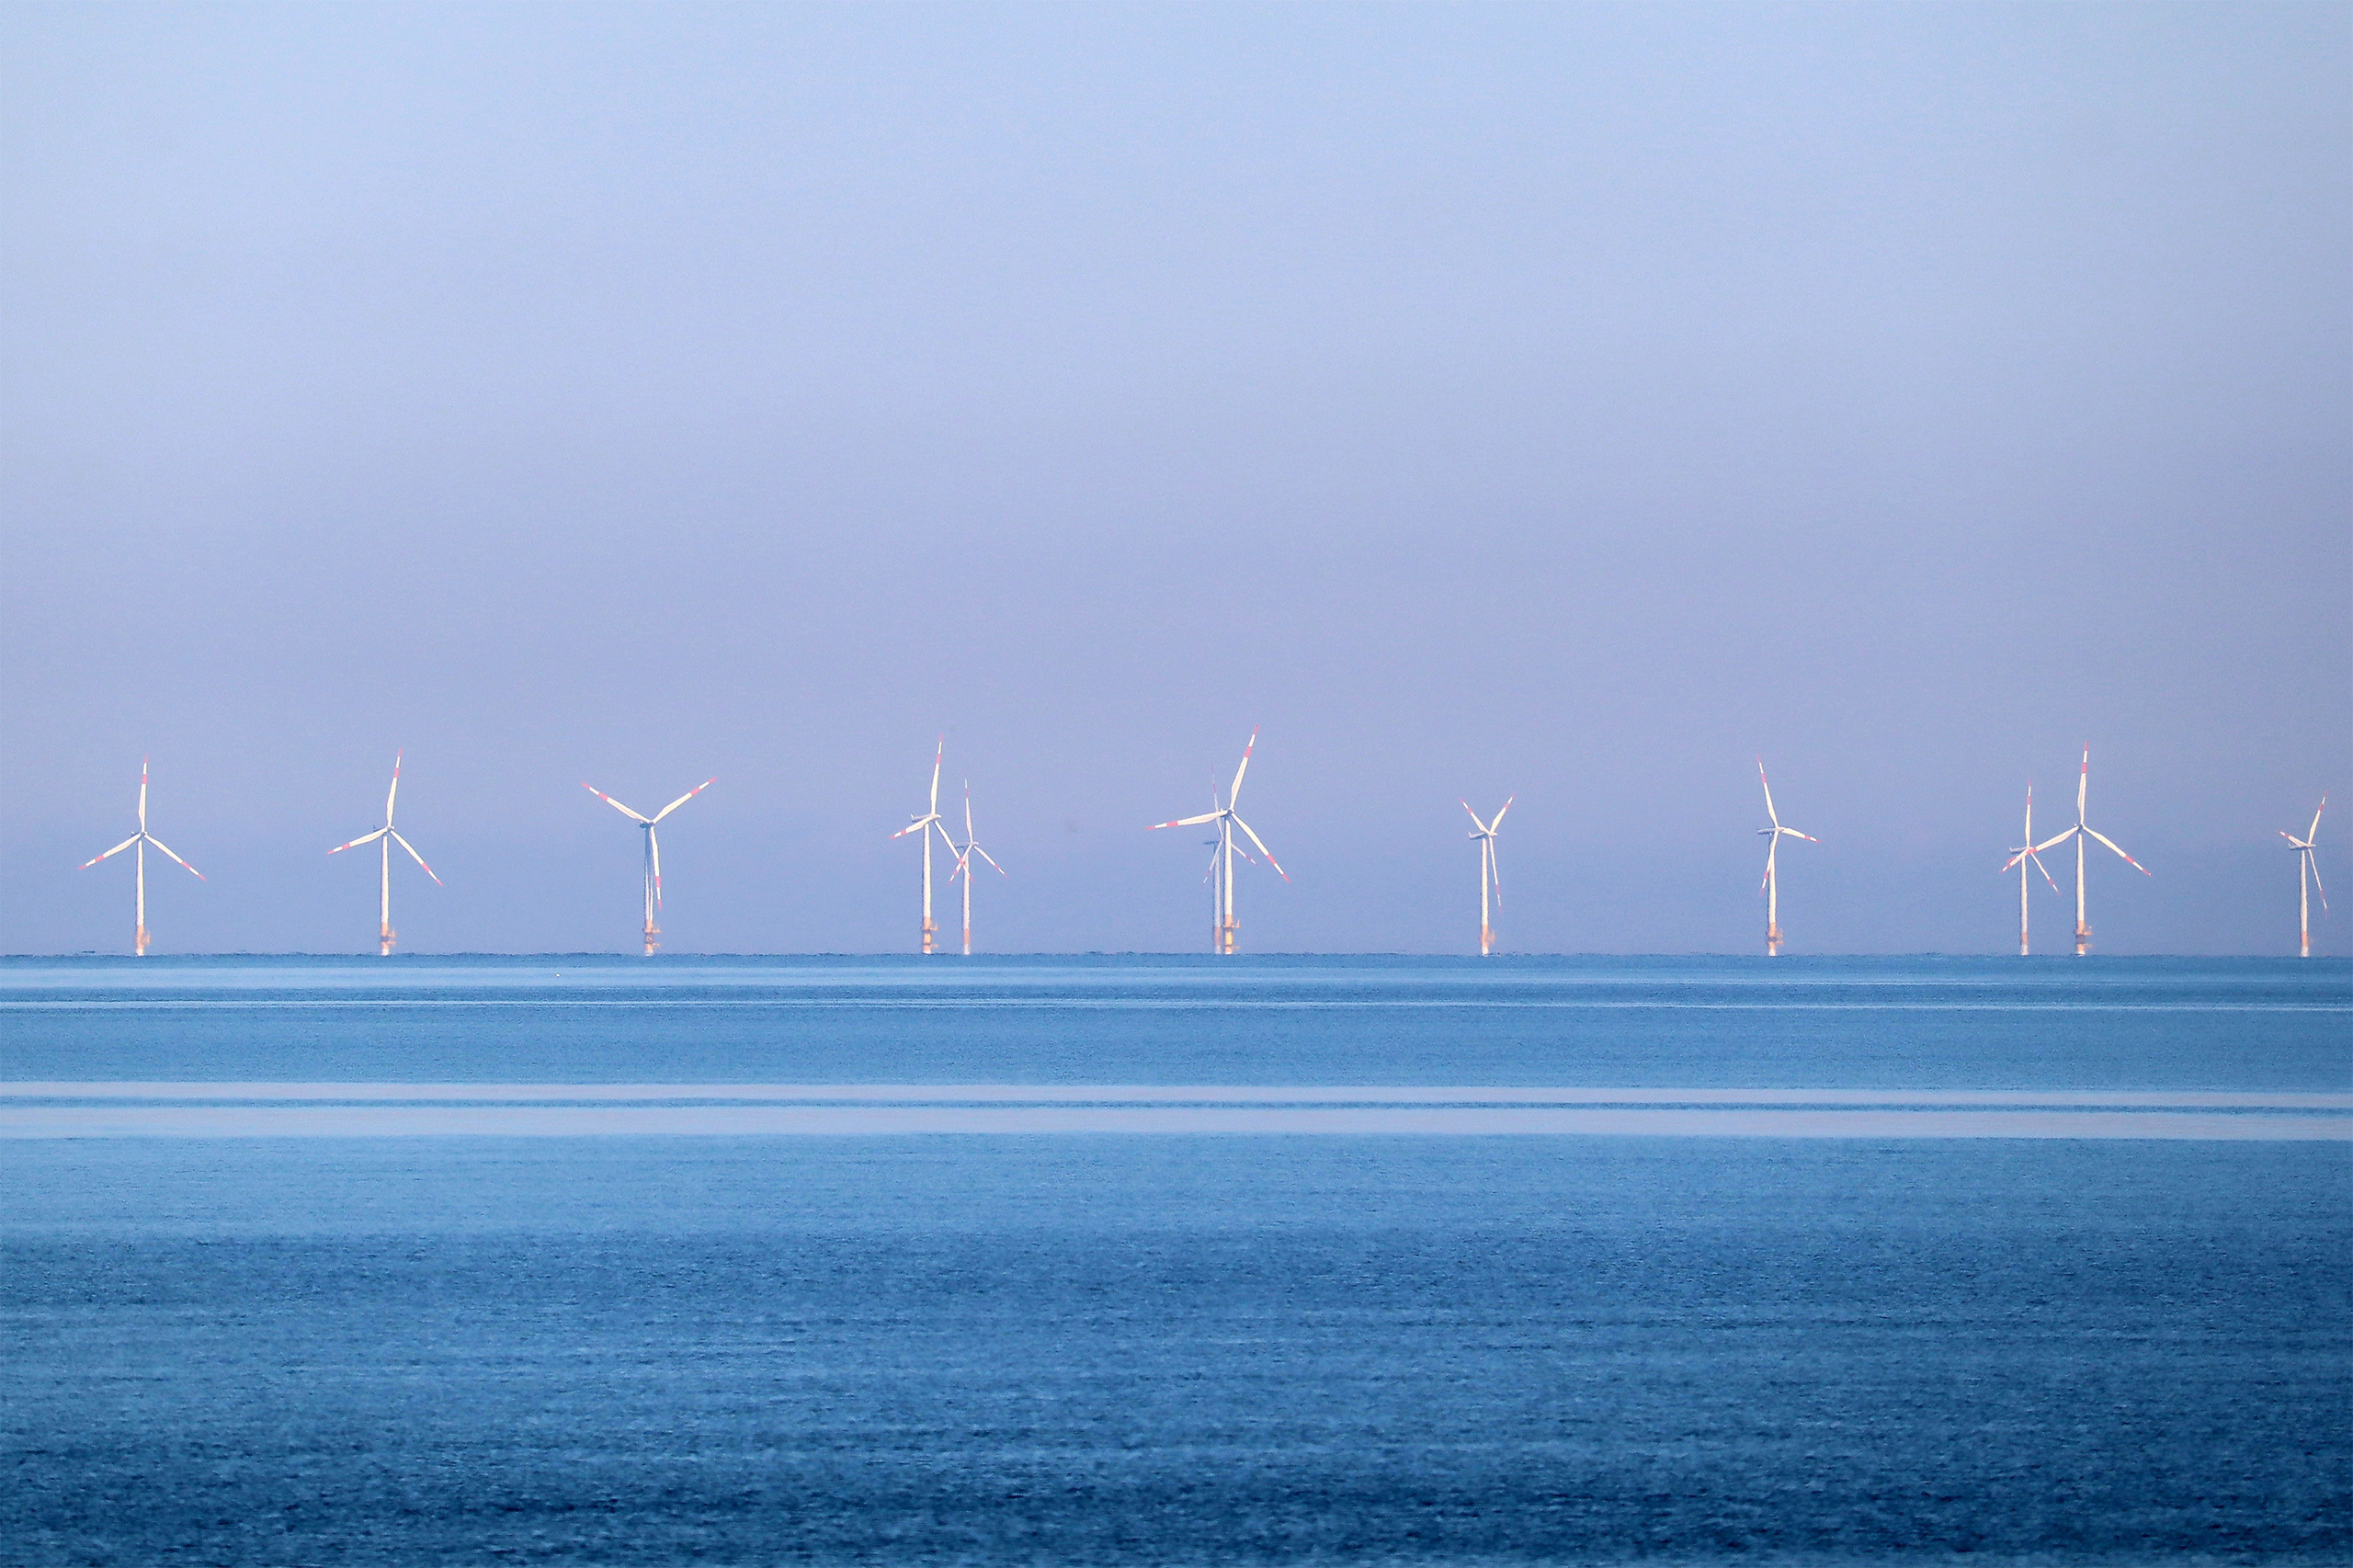 <p>An offshore wind farm in Europe. Colombia’s Caribbean coast has great potential for offshore wind power projects, but is also home to protected areas of ecological importance. (Image: <a href="https://pixabay.com/pt/photos/moinho-de-vento-turbinas-e%C3%B3licas-5622693/">Tho Ge</a> / Pixabay)</p>